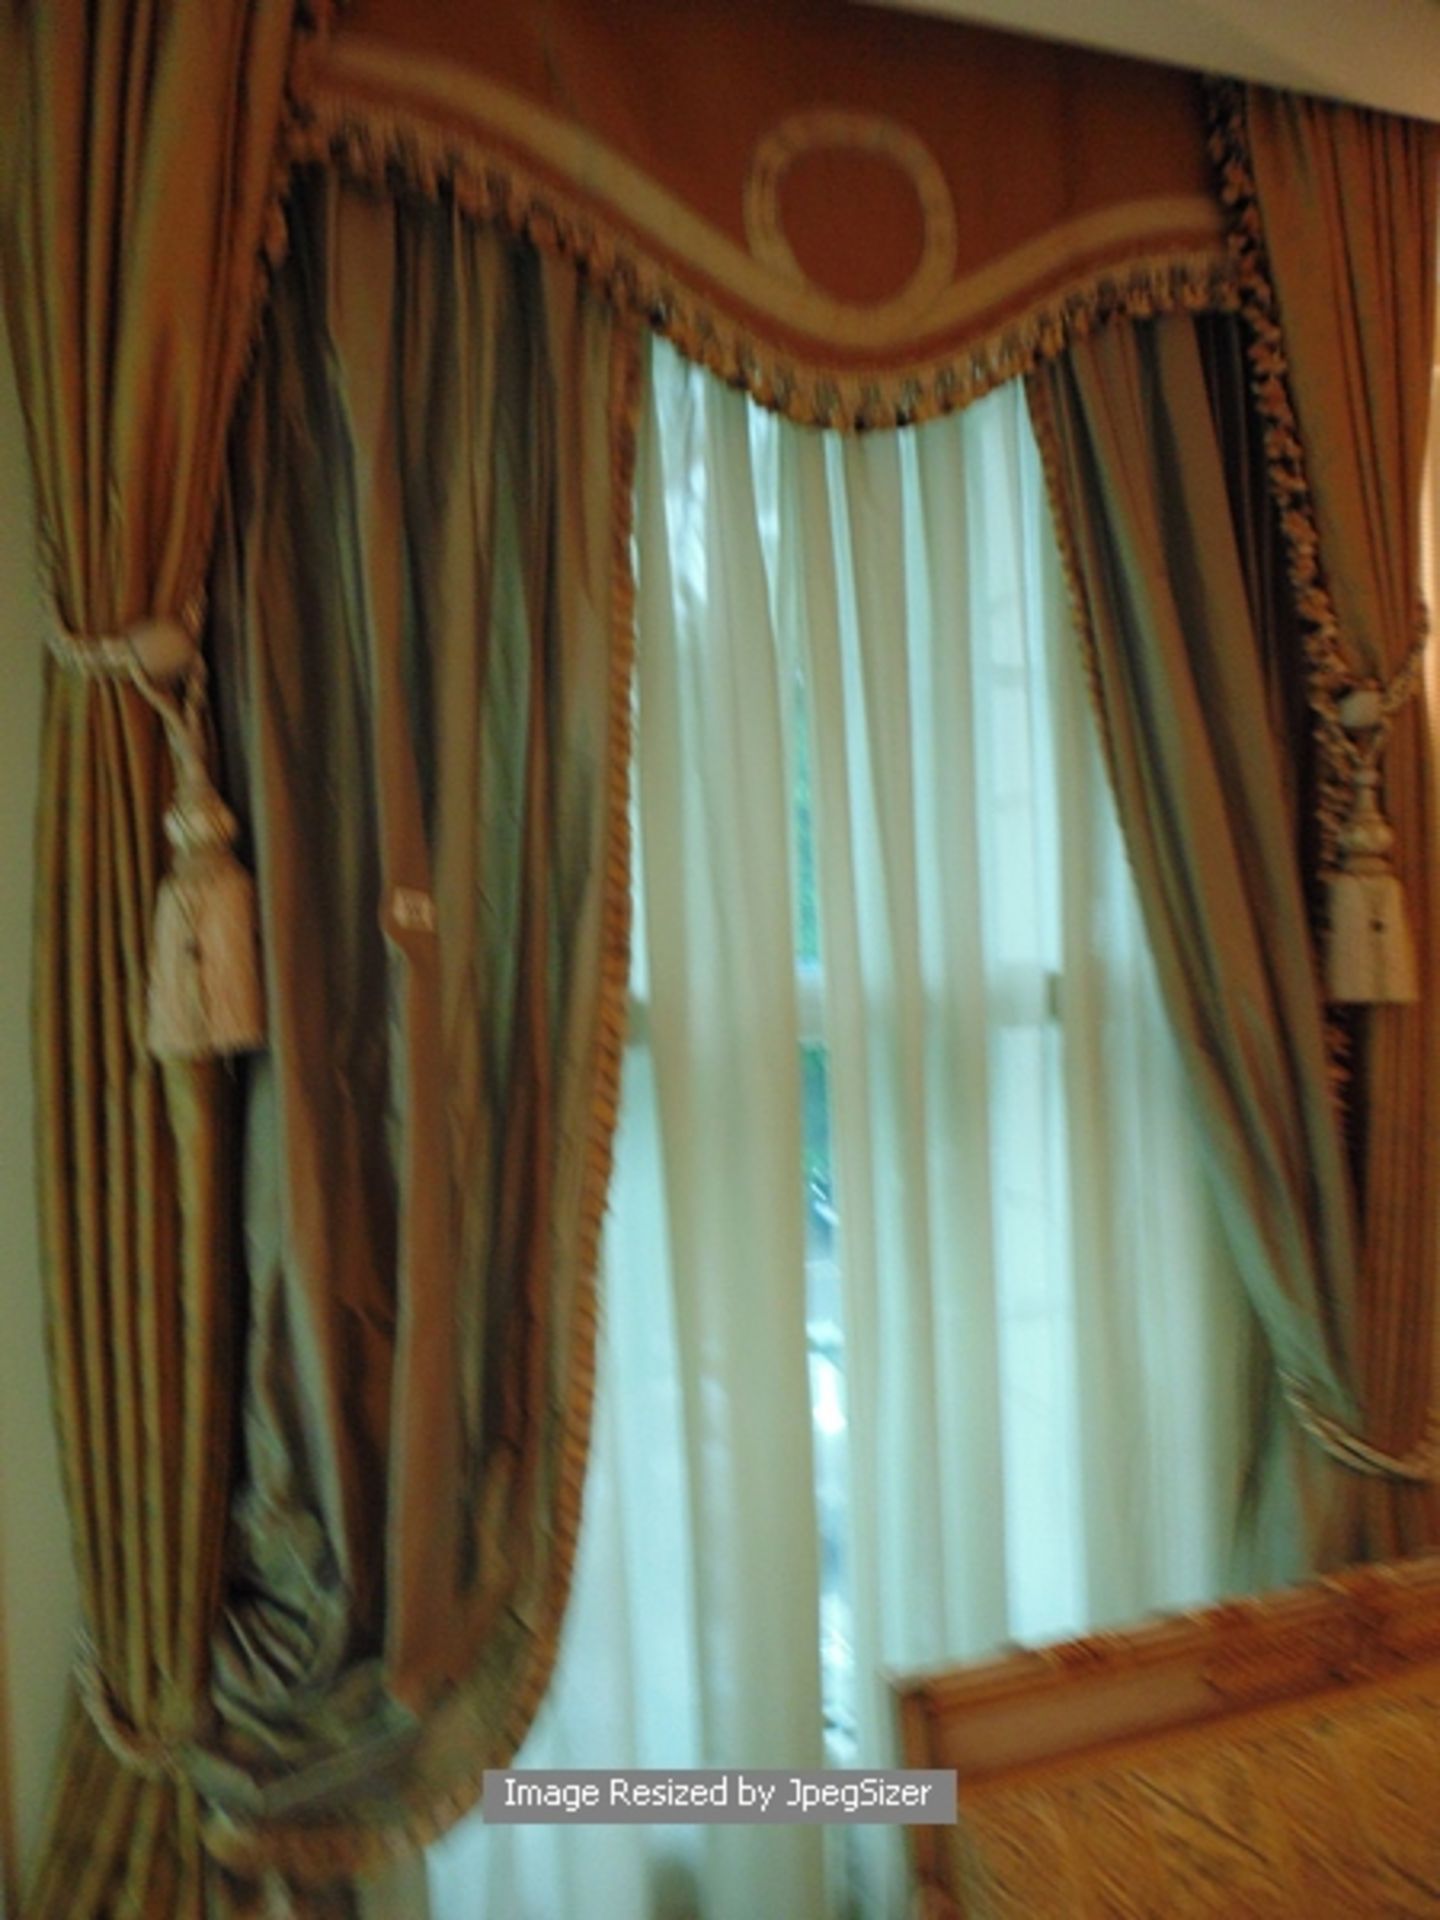 A pair of gold curtains supplied by Jacquard from Rudolph Ackermann`s A series design with elaborate